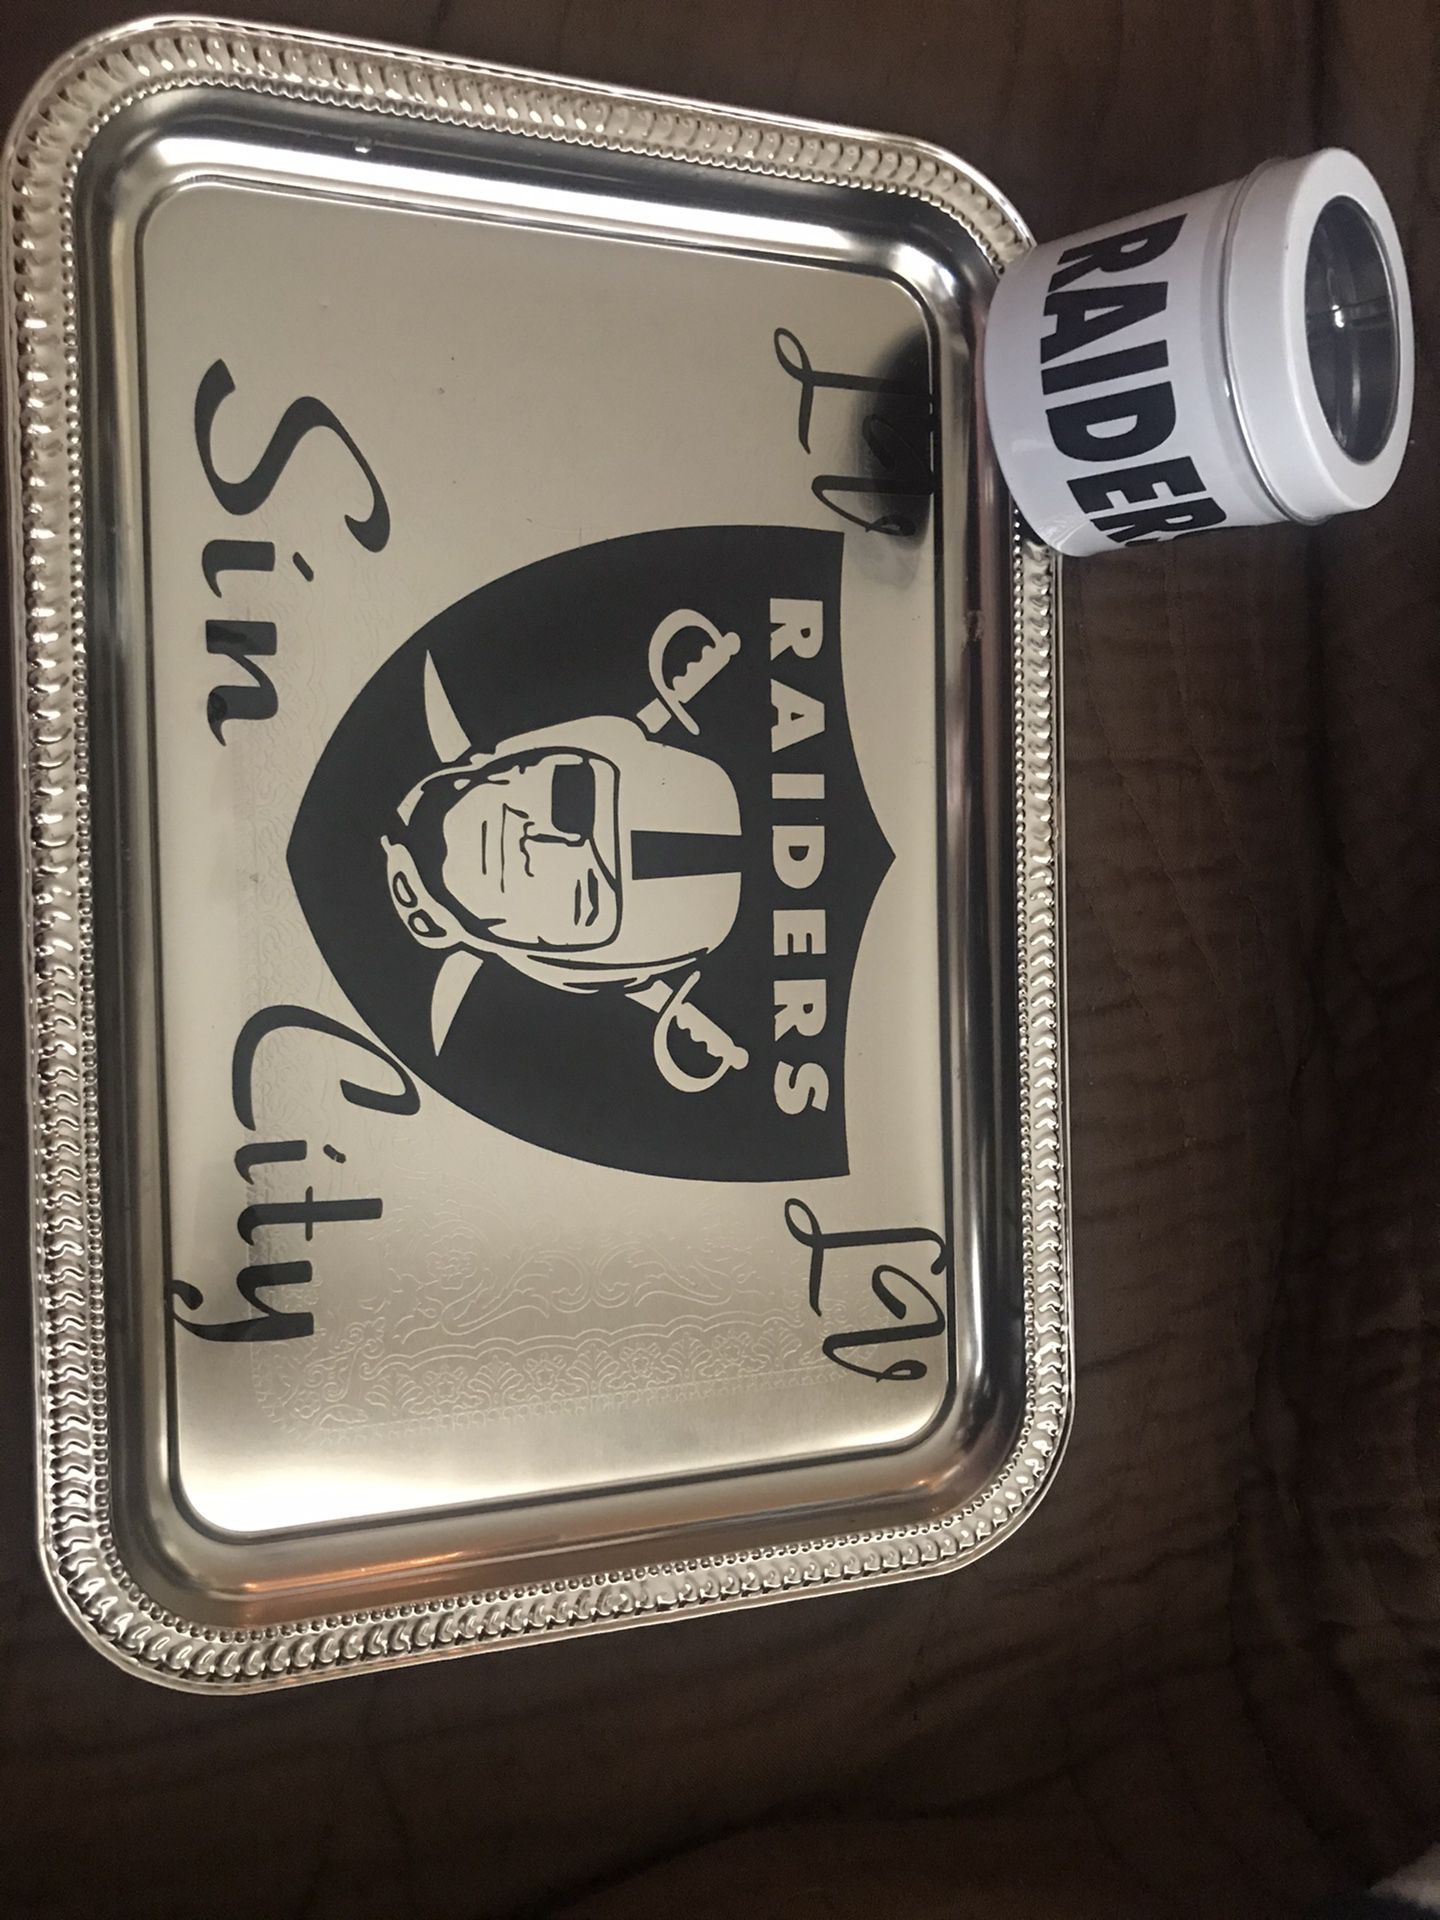 lv rolling tray